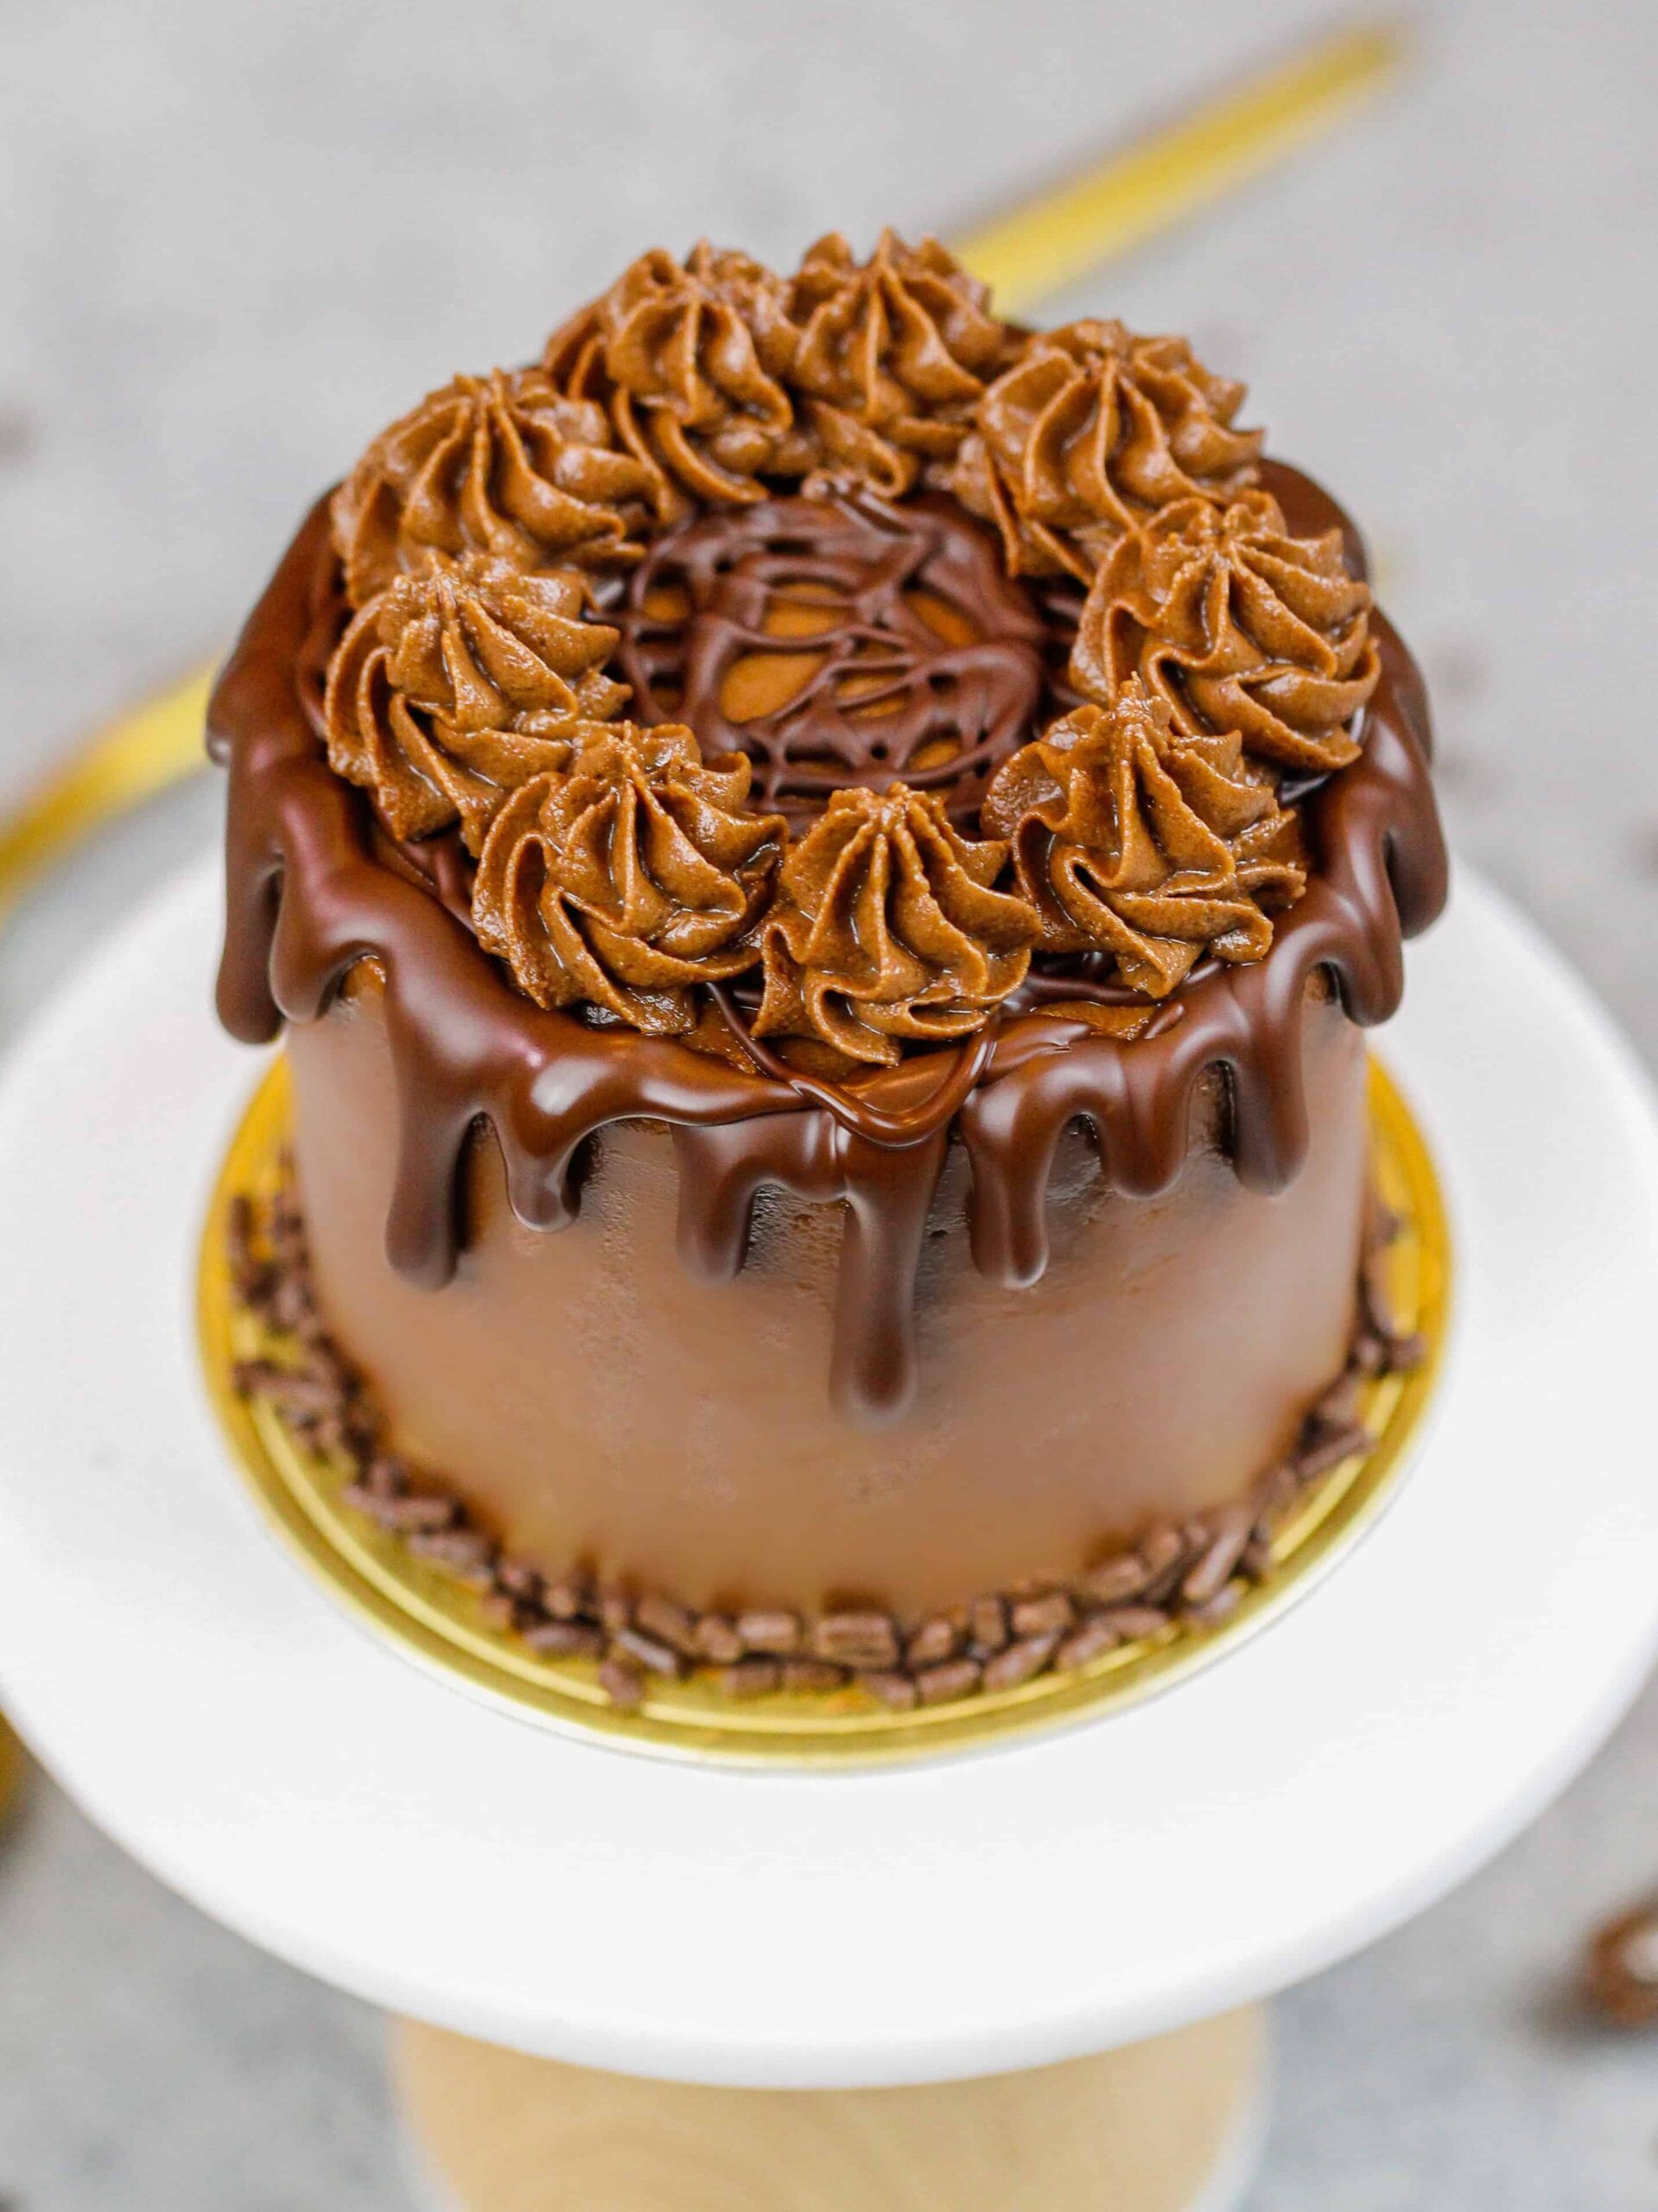 image of a mini chocolate cake decorated with a chocolate drip and chocolate sprinkles